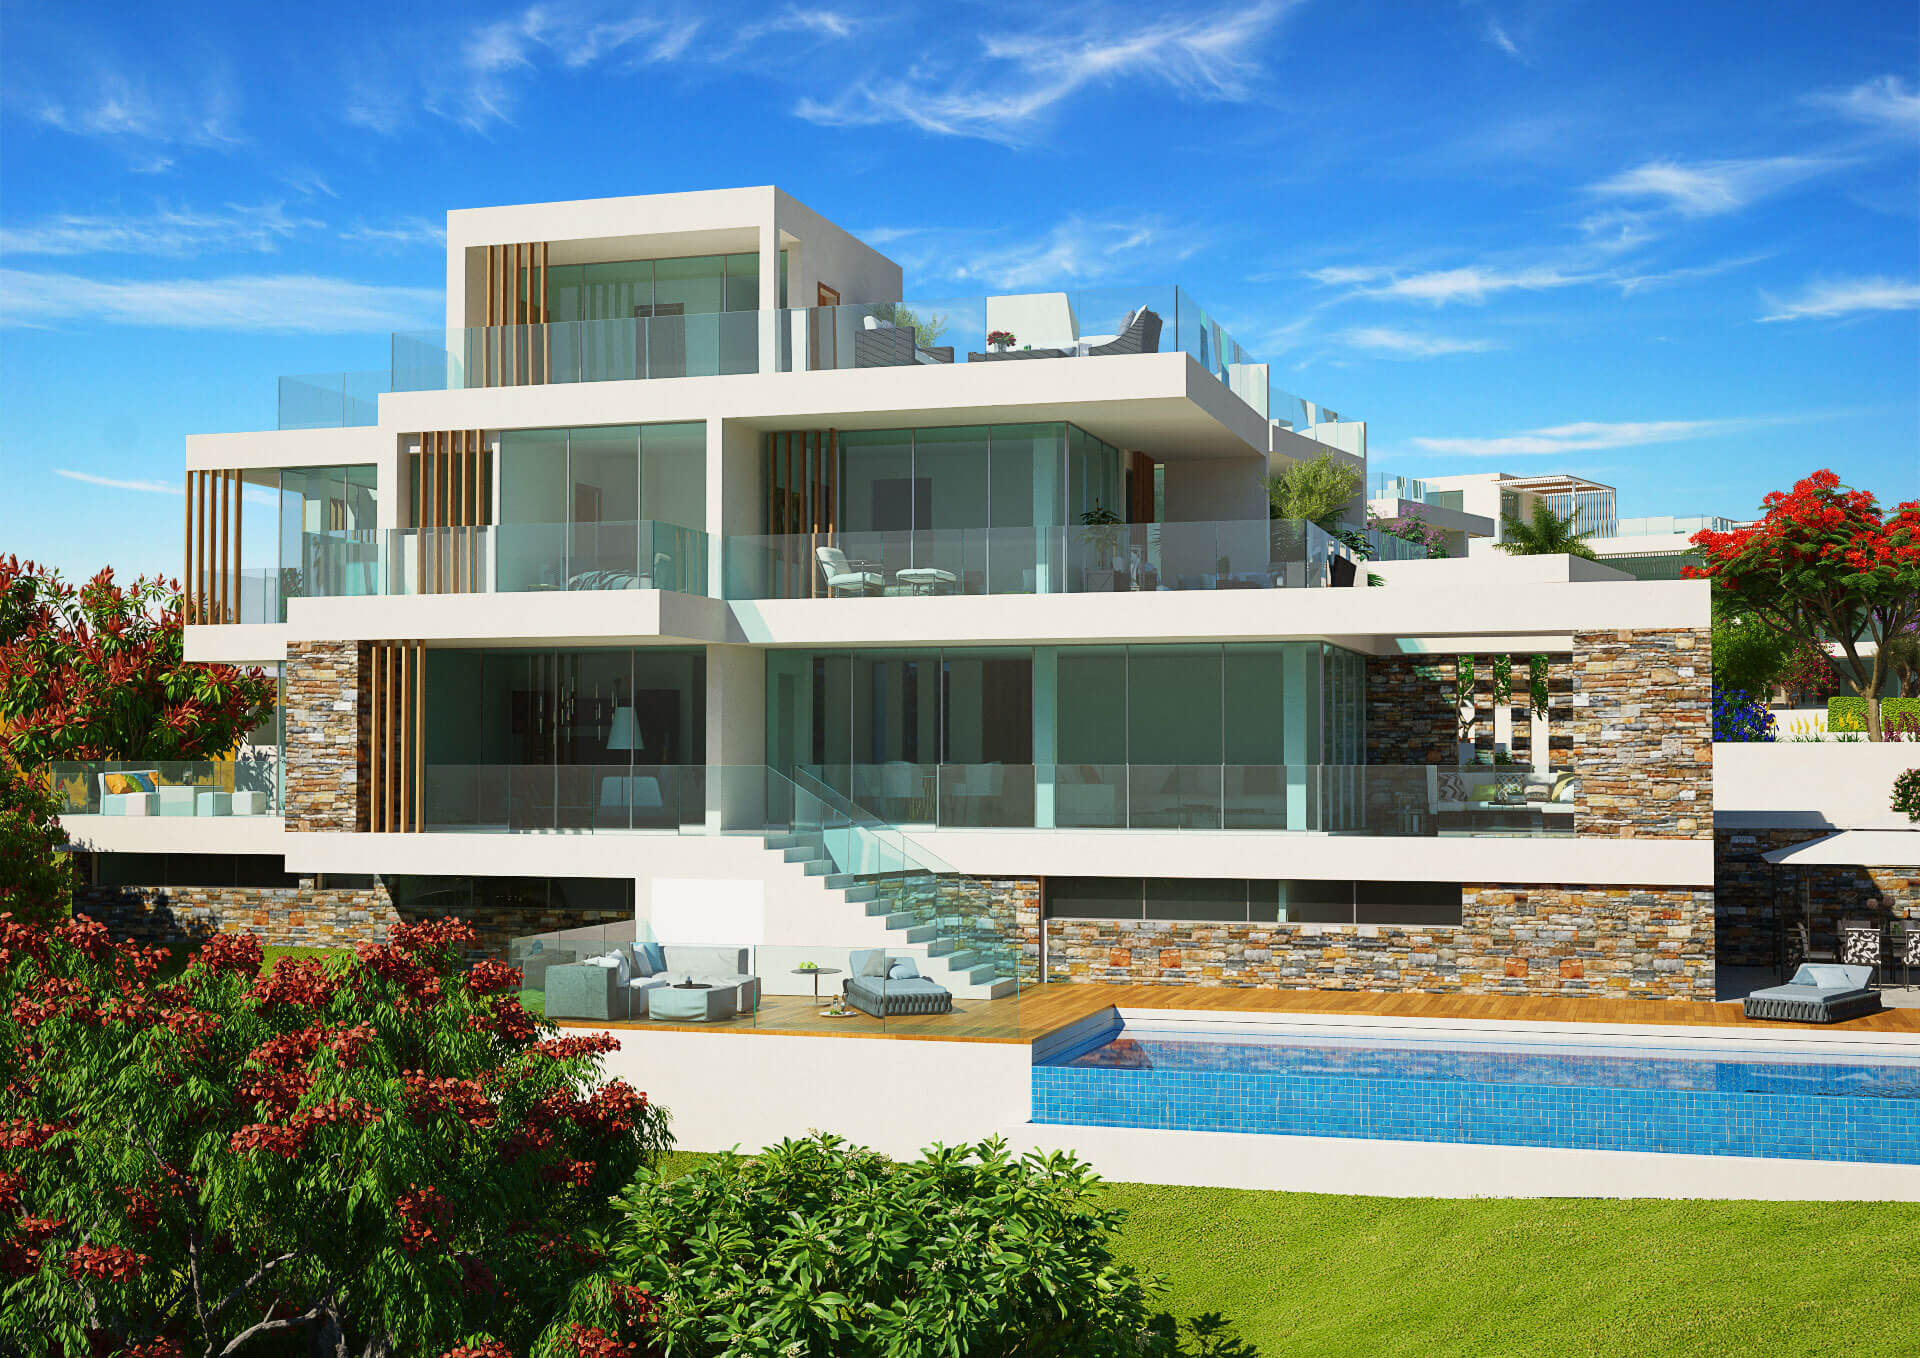 The Elite Residences at the Venus Rock golf resort in Pafos are designed to set a new precedent for luxury living in Cyprus. These state-of-the-art villas are defined by their unique and superior quality, offering sweeping views of the Secret Valley golf course and the alluring waters of the Mediterranean.